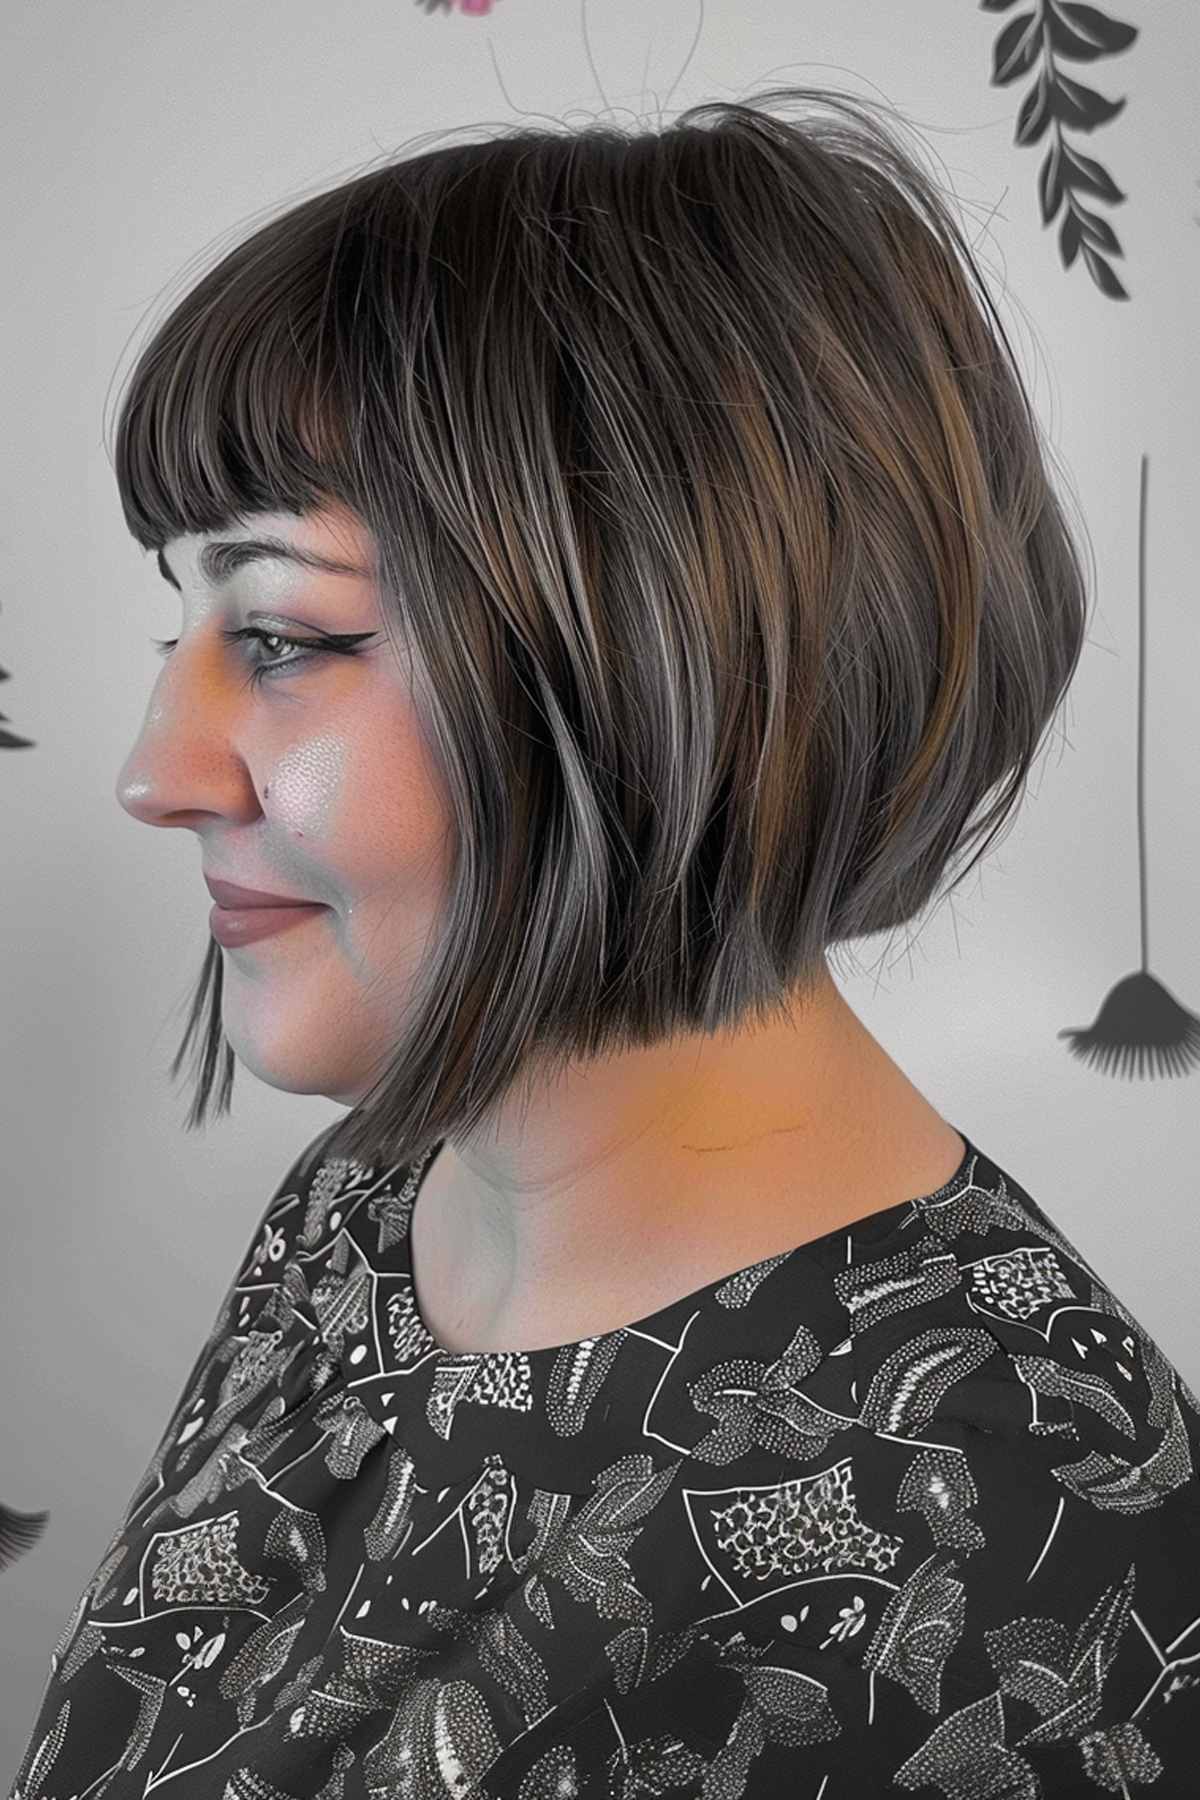 Add baby bangs to an edgy chin-length bob for a bold and trendy look.